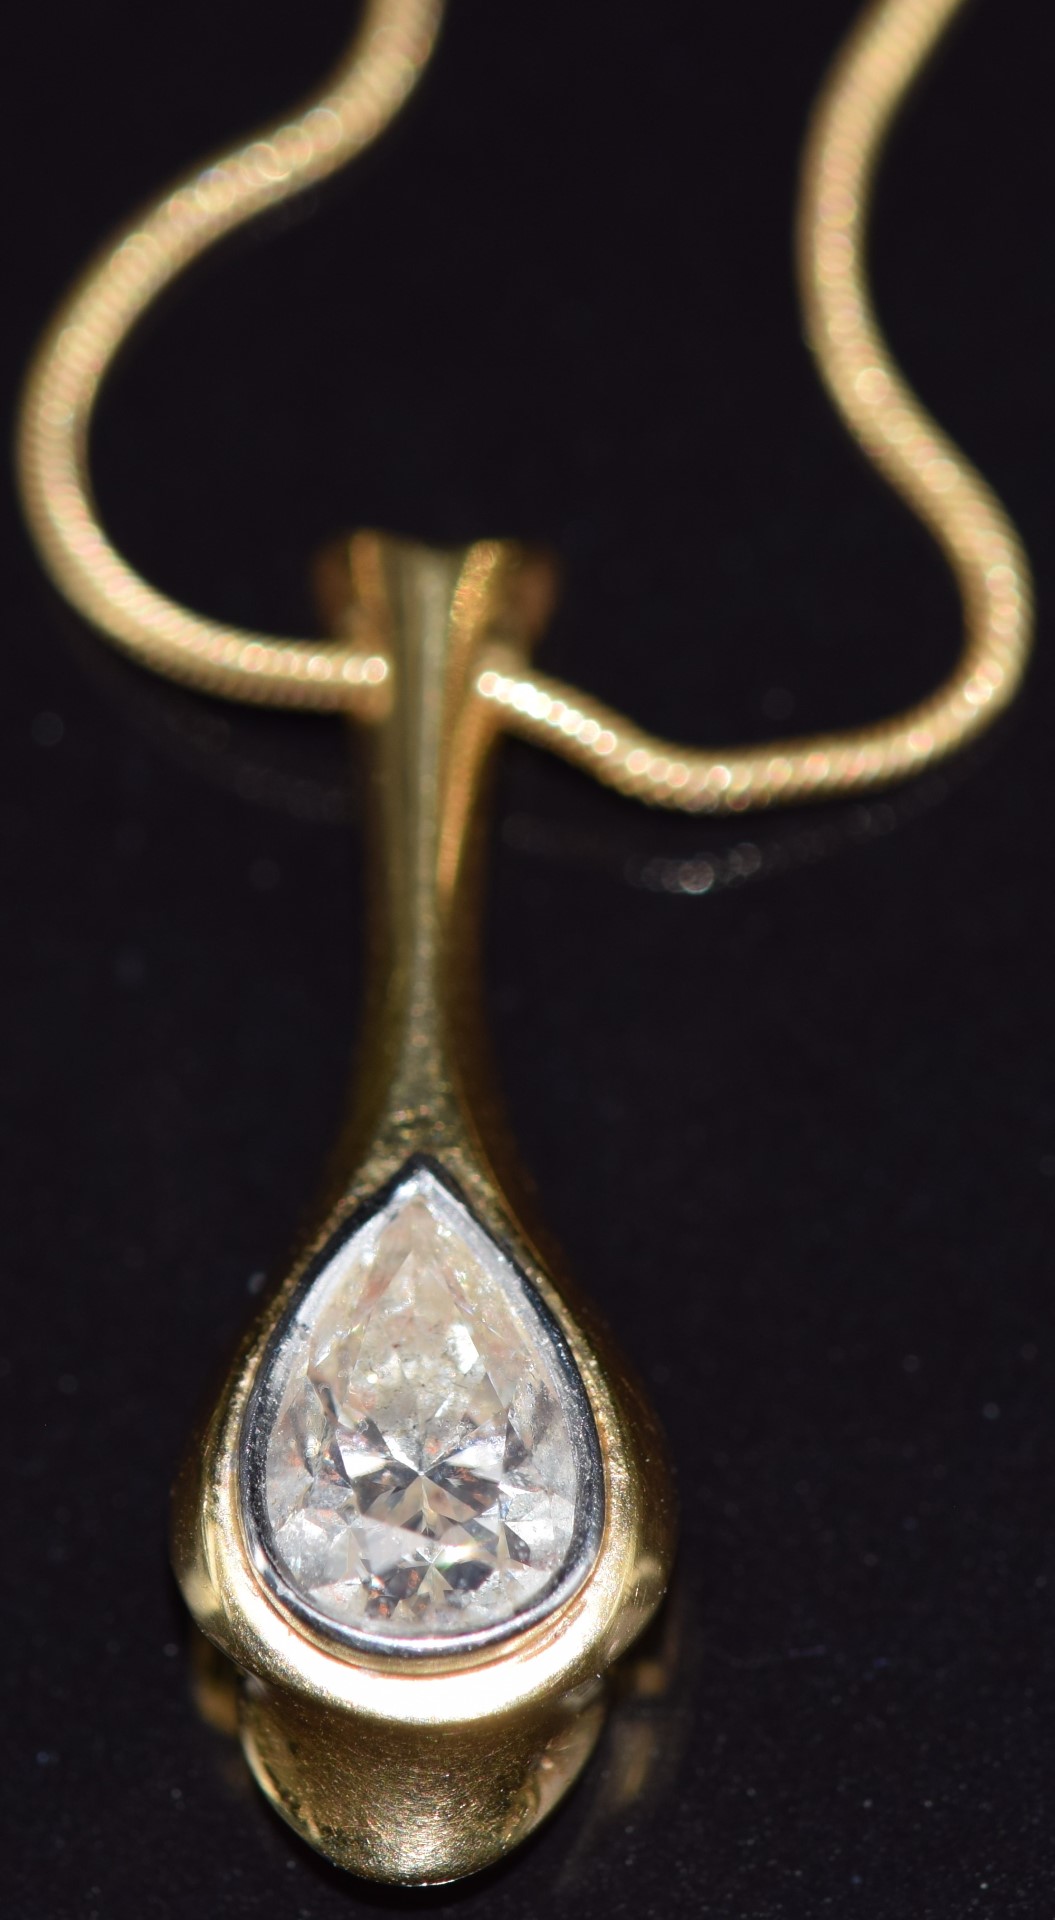 An 18ct gold bespoke pendant set with a 1.5ct pear cut diamond, on an 18ct gold chain, 9.1g - Image 2 of 6